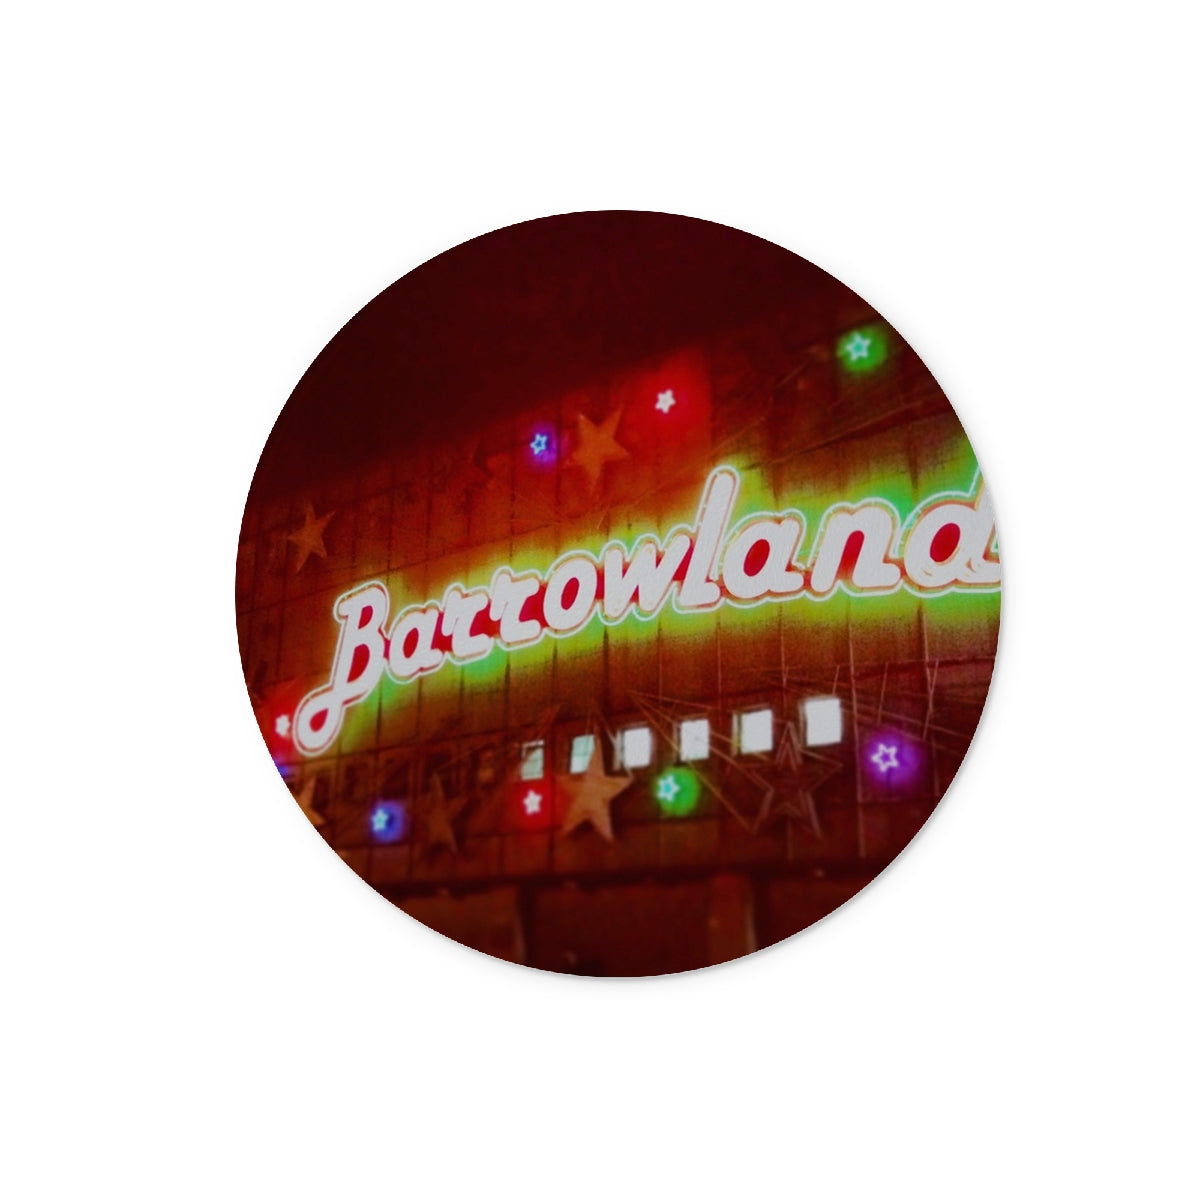 A Neon Glasgow Barrowlands Art Gifts Glass Chopping Board-Glass Chopping Boards-Edinburgh & Glasgow Art Gallery-12" Round-Paintings, Prints, Homeware, Art Gifts From Scotland By Scottish Artist Kevin Hunter